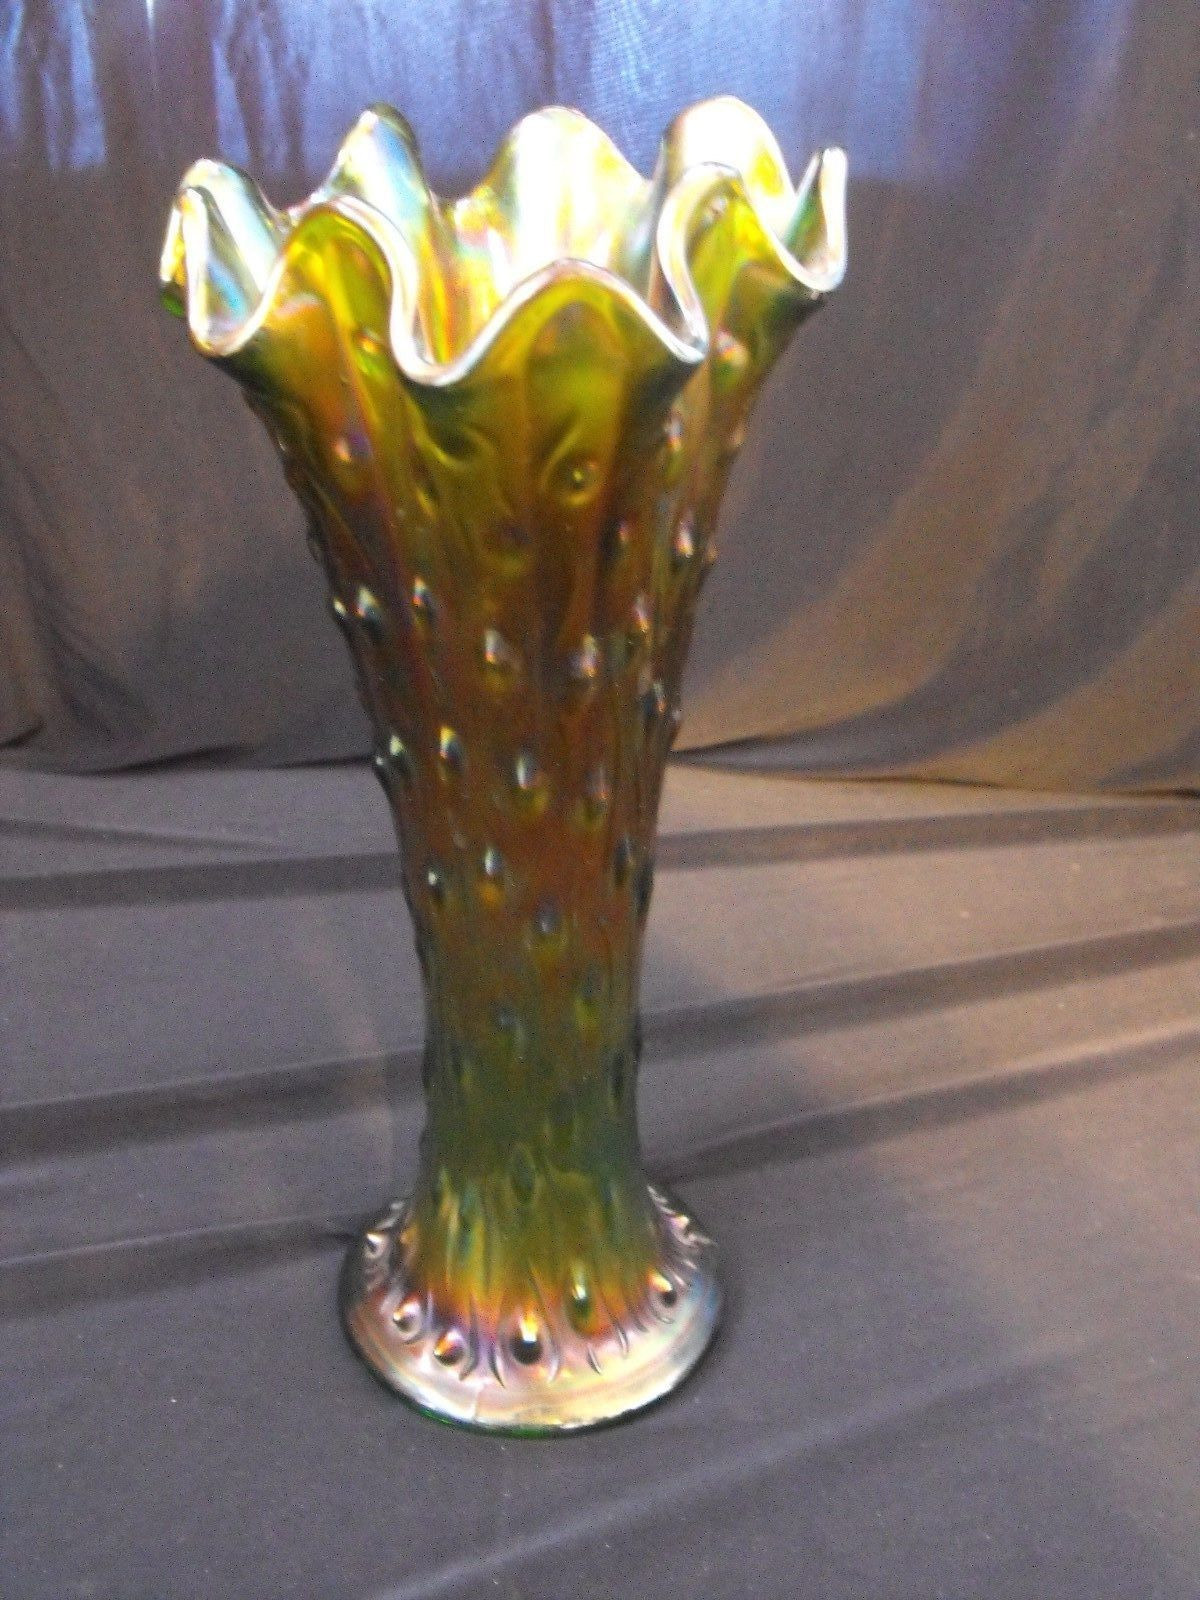 thin glass vase of northwood carnival glass tree trunk green irridescent ebay intended for northwood carnival glass tree trunk green irridescent ebay